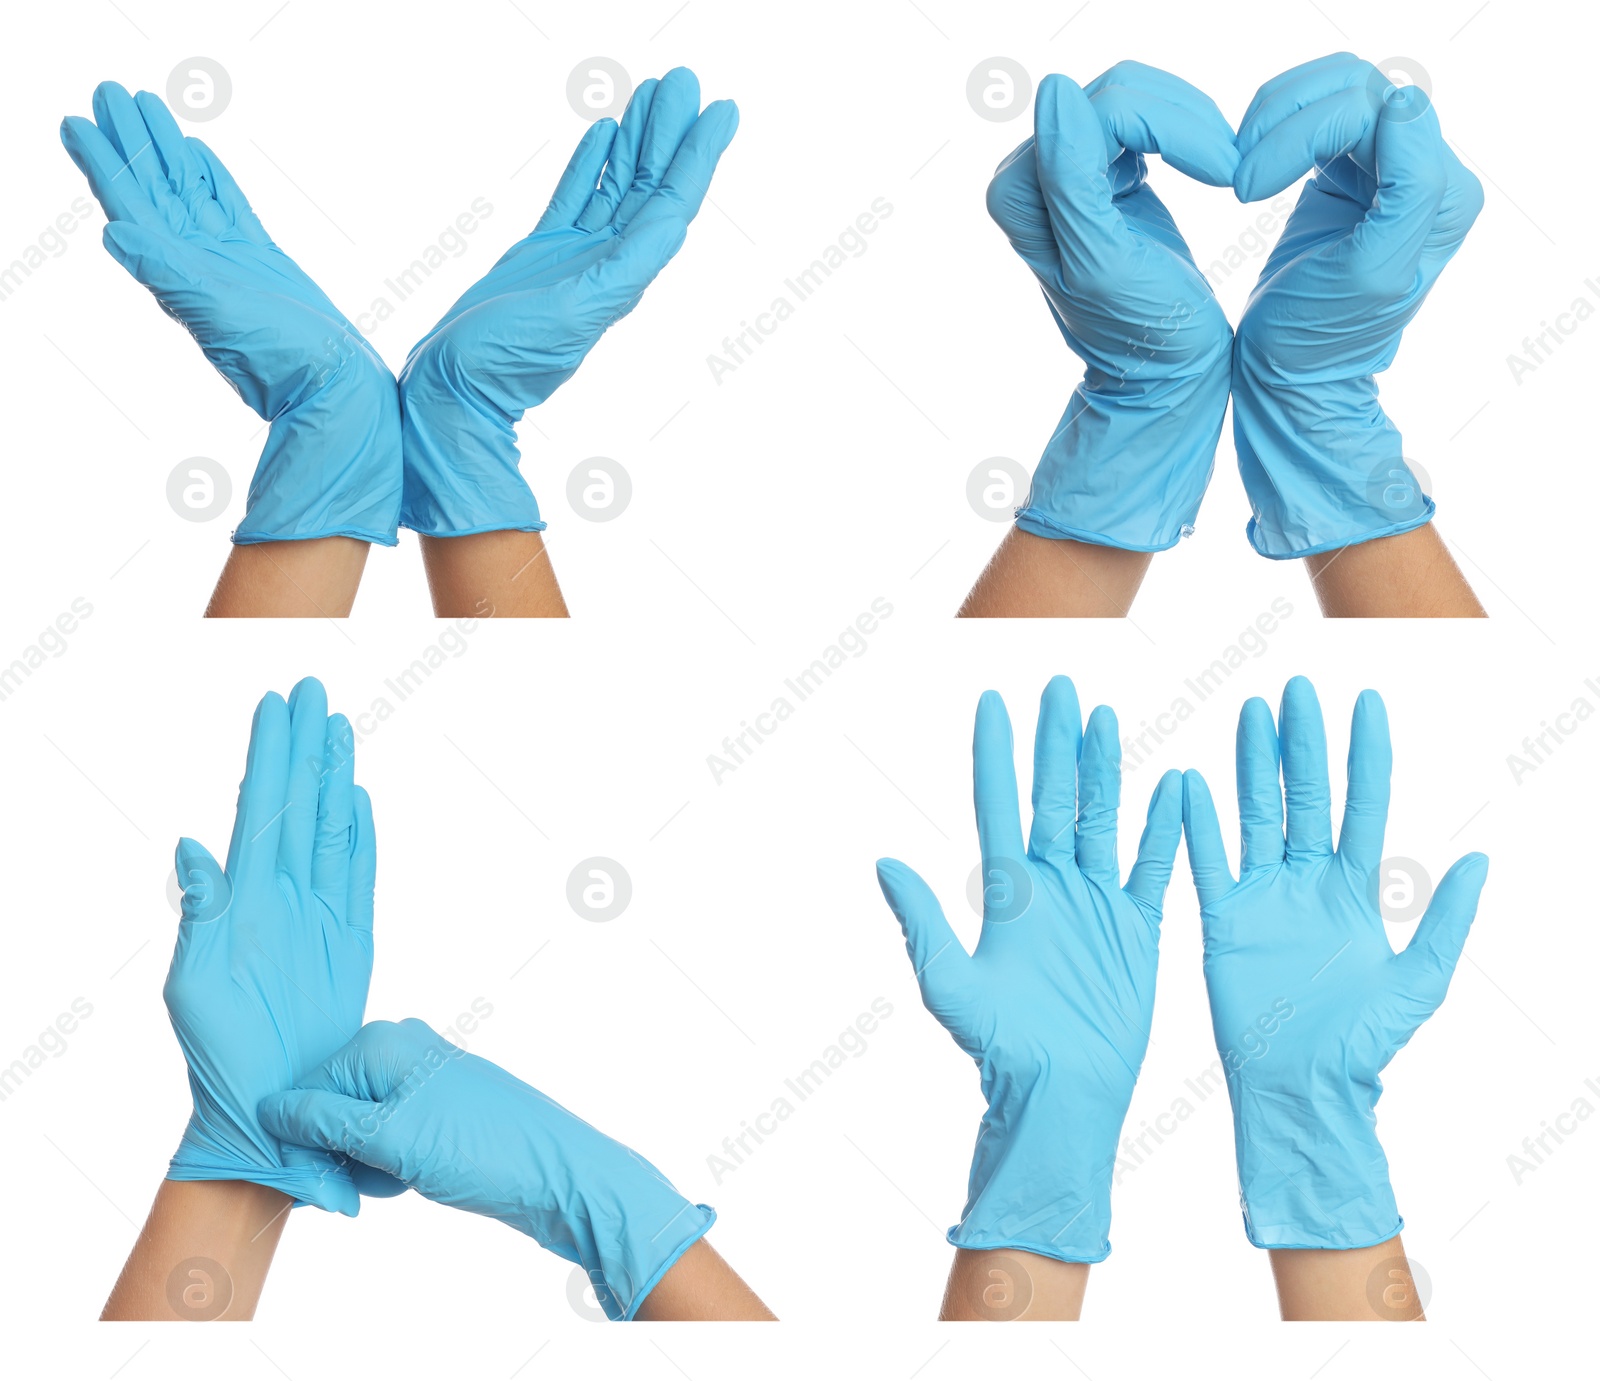 Image of Collage with photos of woman wearing medical gloves on white background, closeup